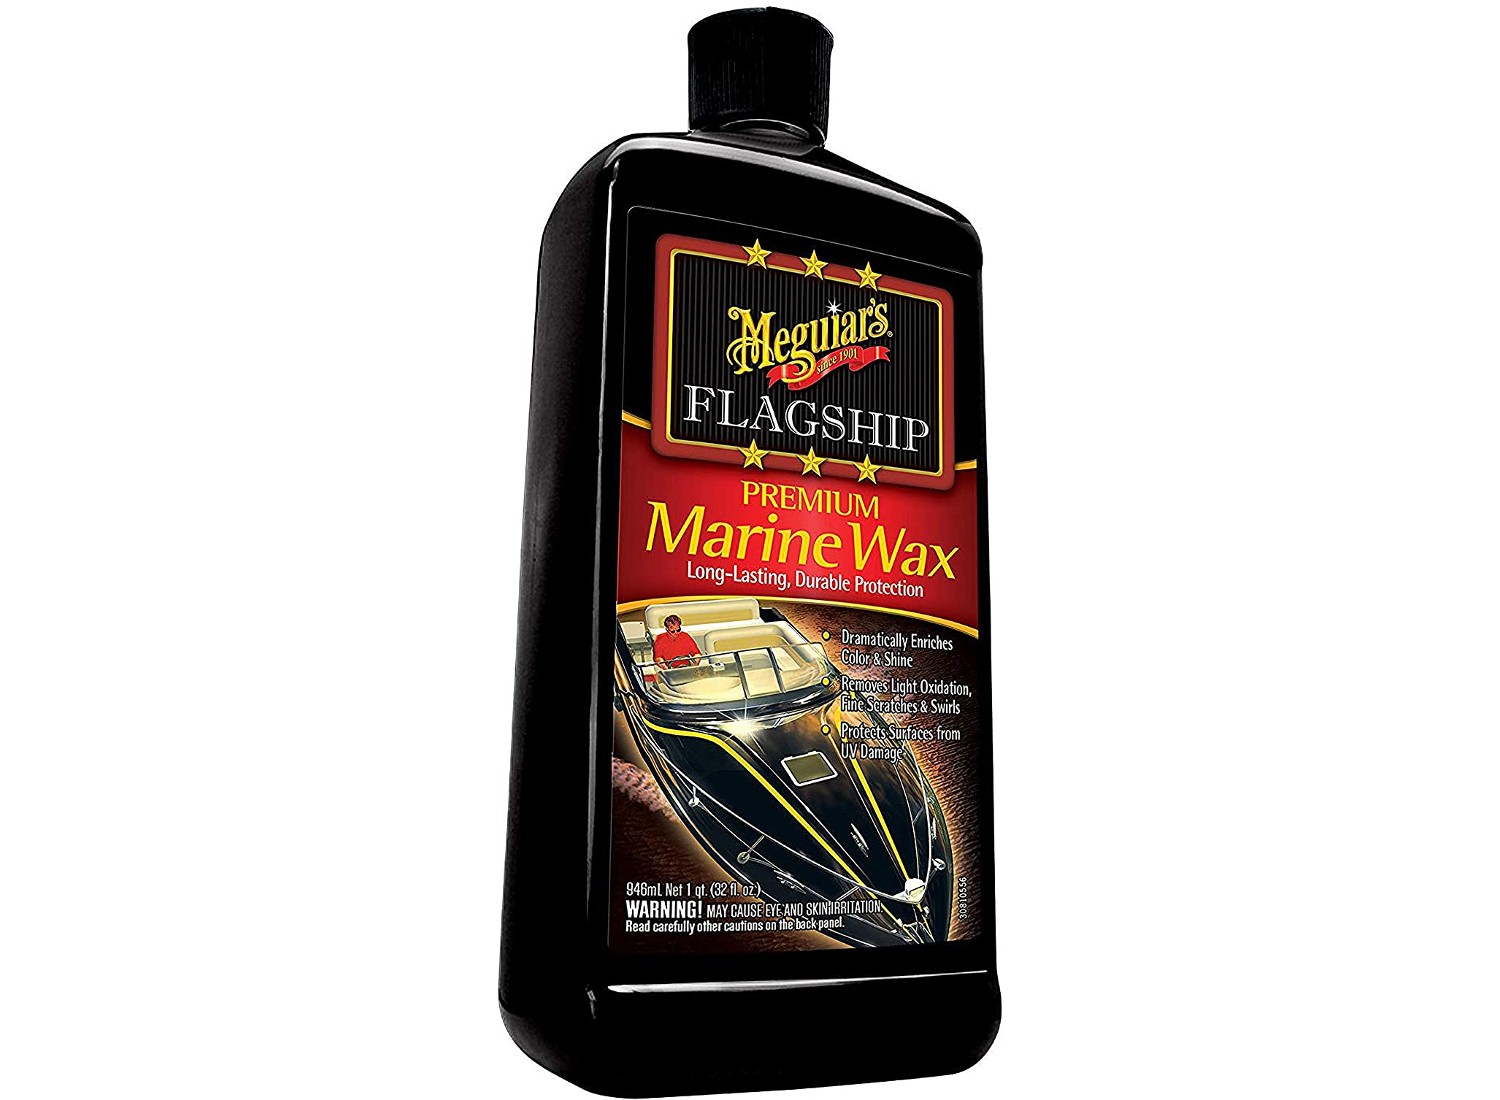 3M Perfect-It Boat Wax, 36113, 1 Quart, Contains Carnauba Wax, Protects  against Weather and Oxidation, For Boats and RVs